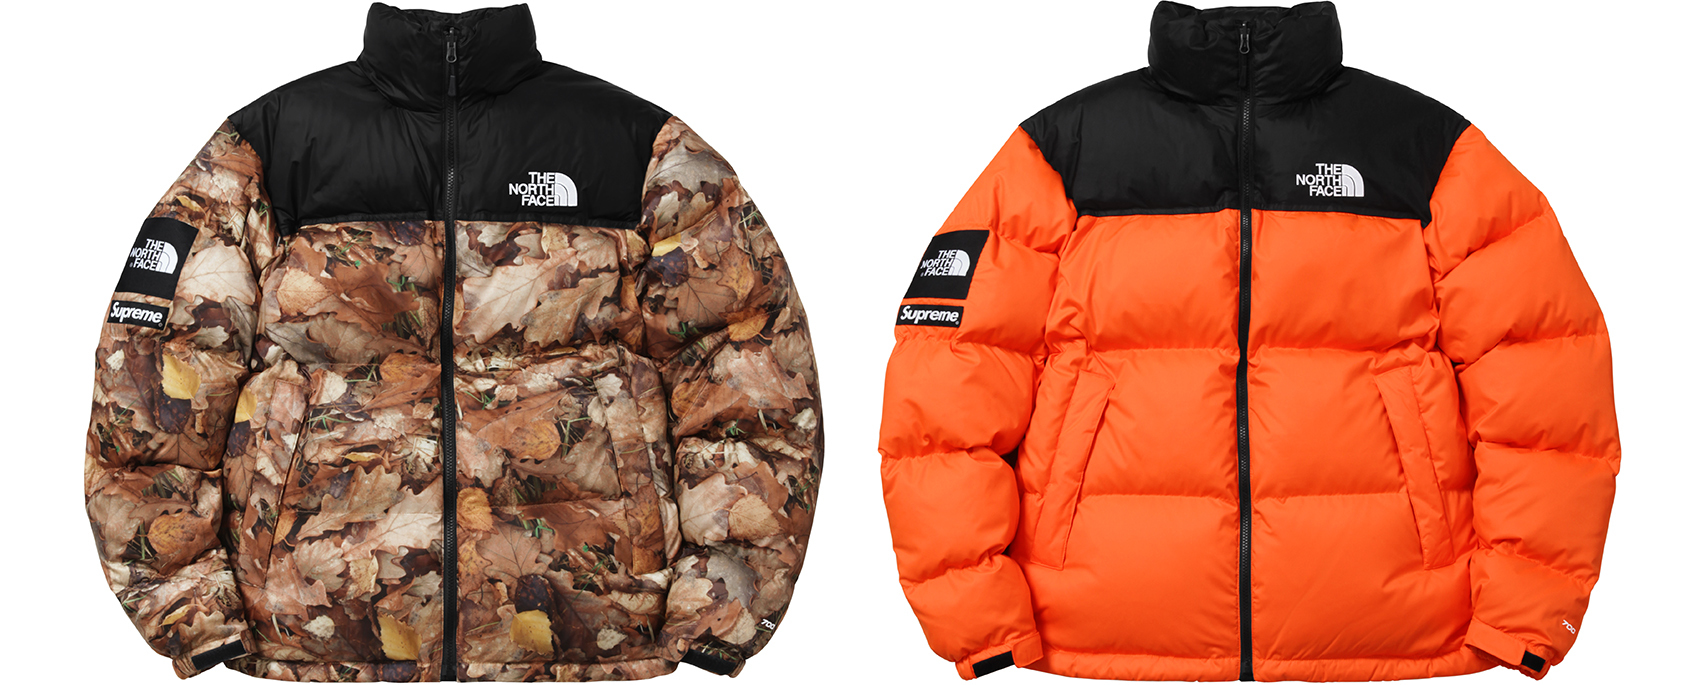 Supreme x The North Face Fall/Winter 2016 Collection